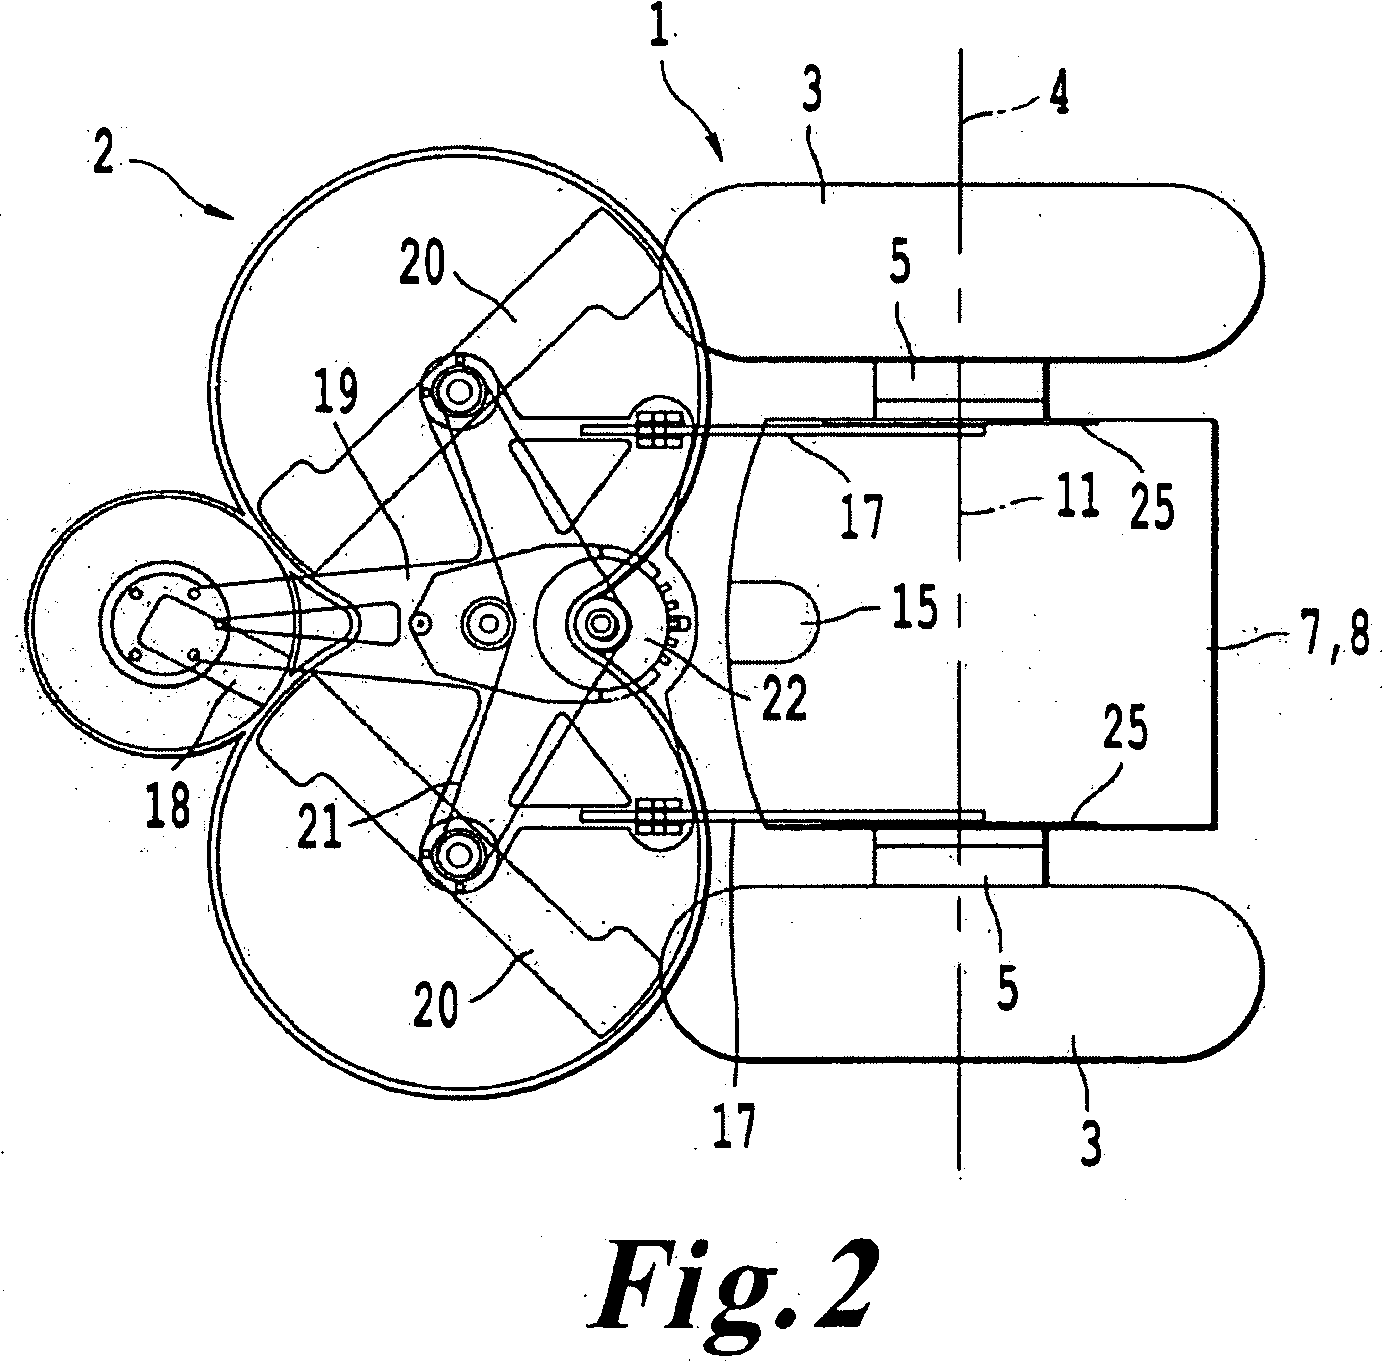 Single-axle vehicle with a platform and/or a seat for a driver